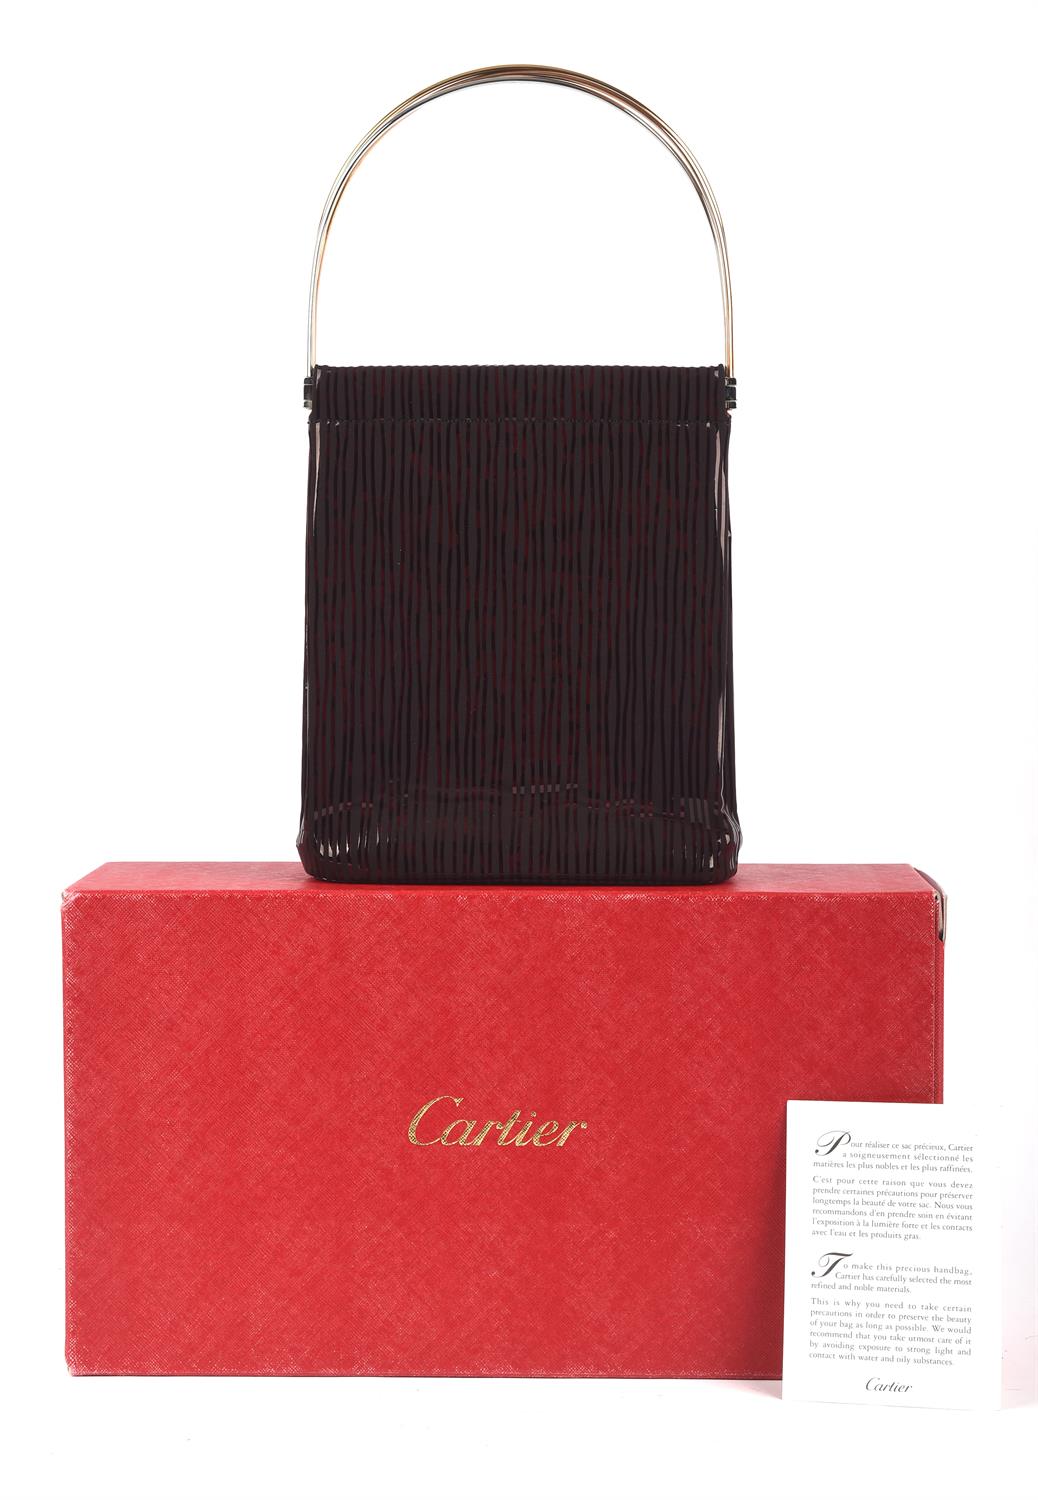 CARTIER MUST DE CARTIER boxed structured black and shimmering red handbag with gold, - Image 7 of 7